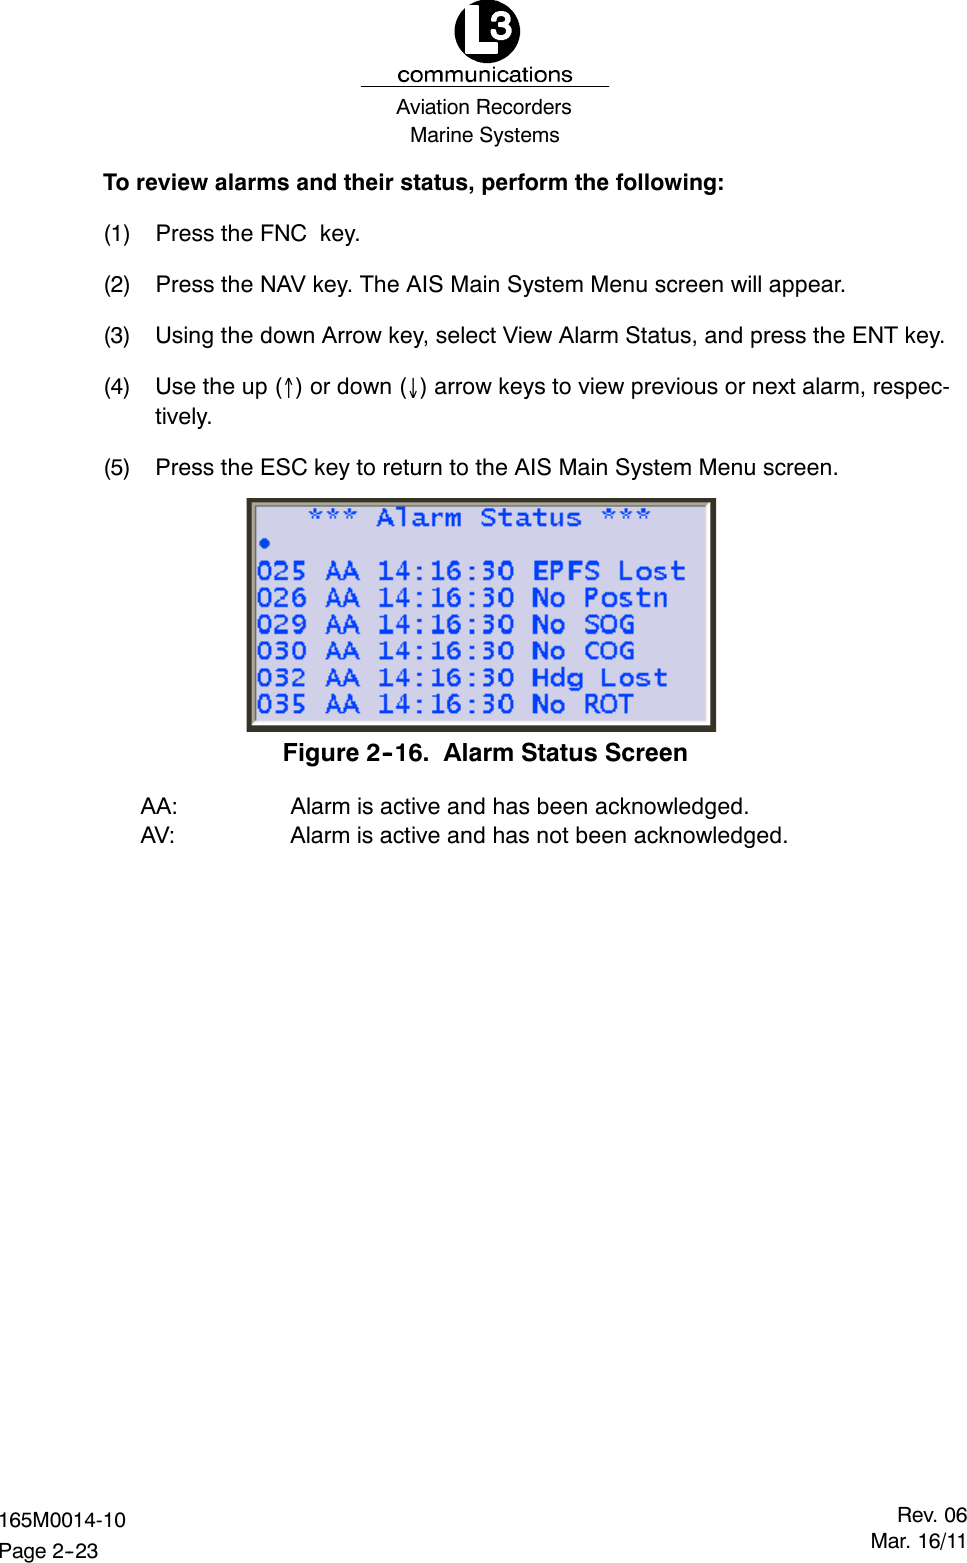 Marine SystemsAviation RecordersRev. 06Mar. 16/11165M0014-10Page 2--23To review alarms and their status, perform the following:(1) Press the FNC key.(2) Press the NAV key. The AIS Main System Menu screen will appear.(3) Using the down Arrow key, select View Alarm Status, and press the ENT key.(4) Usetheup()ordown() arrow keys to view previous or next alarm, respec-tively.(5) Press the ESC key to return to the AIS Main System Menu screen.Figure 2--16. Alarm Status ScreenAA: Alarm is active and has been acknowledged.AV: Alarm is active and has not been acknowledged.